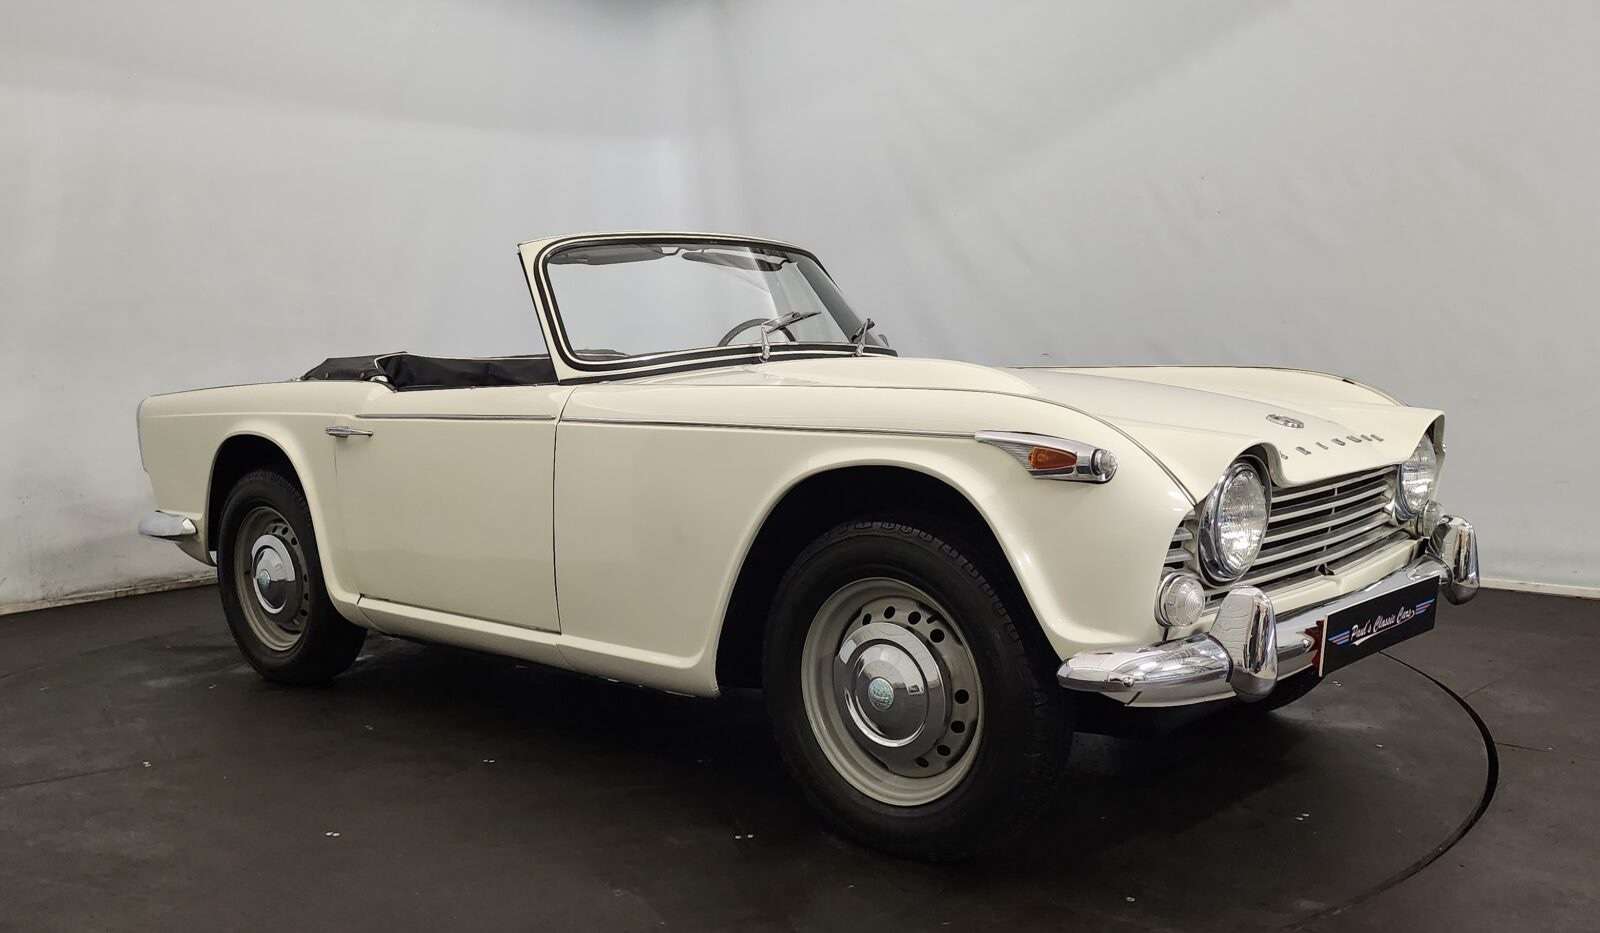 Triumph TR4 Convertible in White used in Créances for € 37,500.-